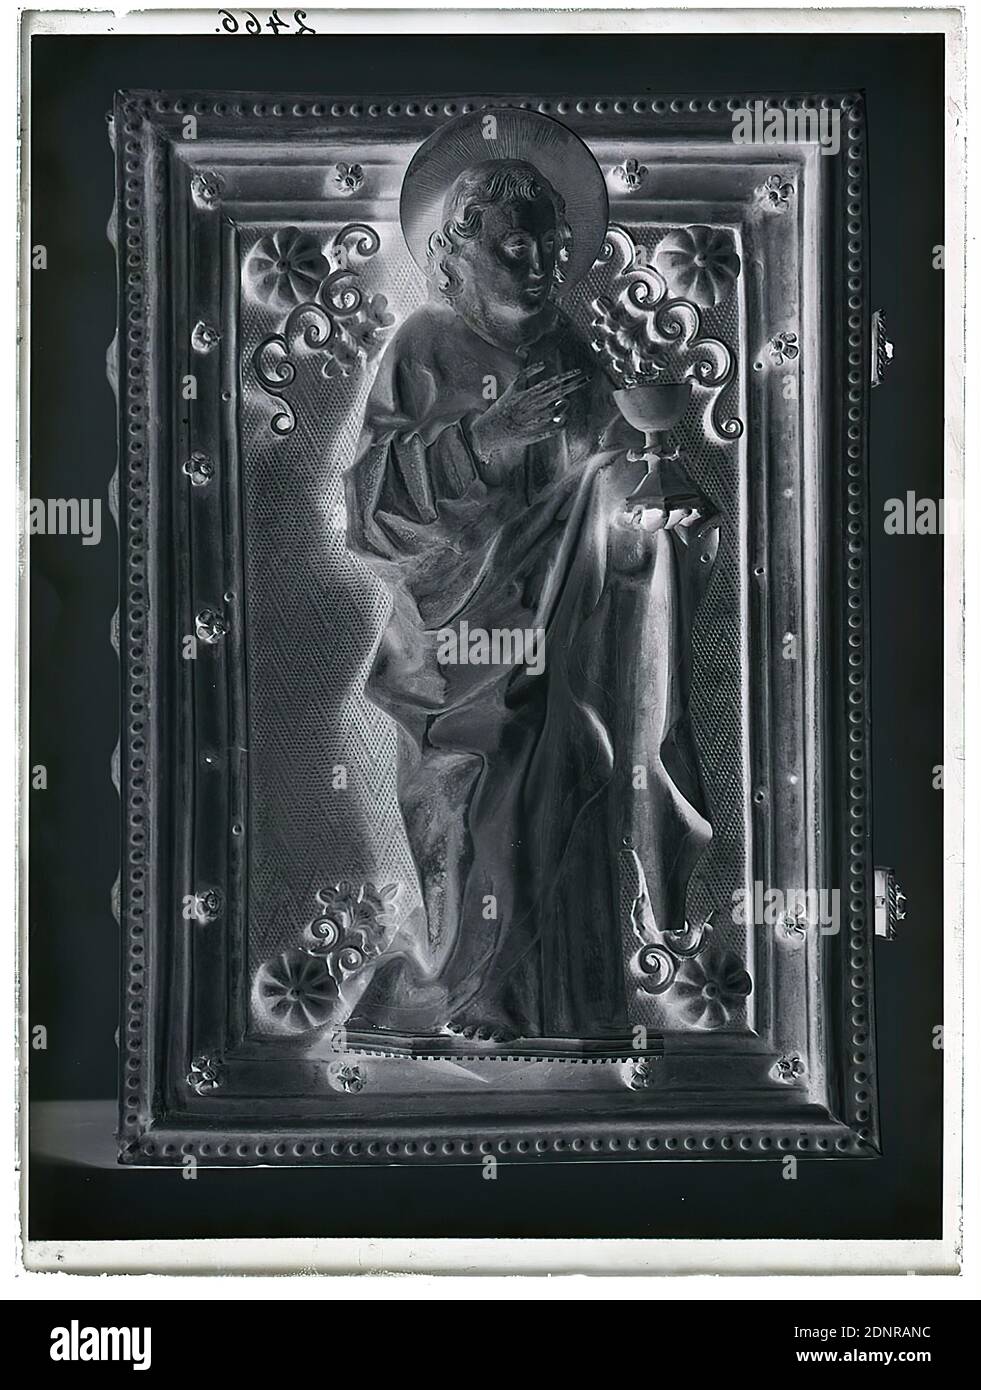 Wilhelm Weimar, Gospel book with silver cover, glass negative, black and white negative process, total: height: 23,8 cm; width: 17,8 cm, numbered: top left: in black ink: 2466. work of applied art (precious metals), 6400 slides, including art reproductions of his own holdings, foreign objects, architectural and exhibition photographs Stock Photo